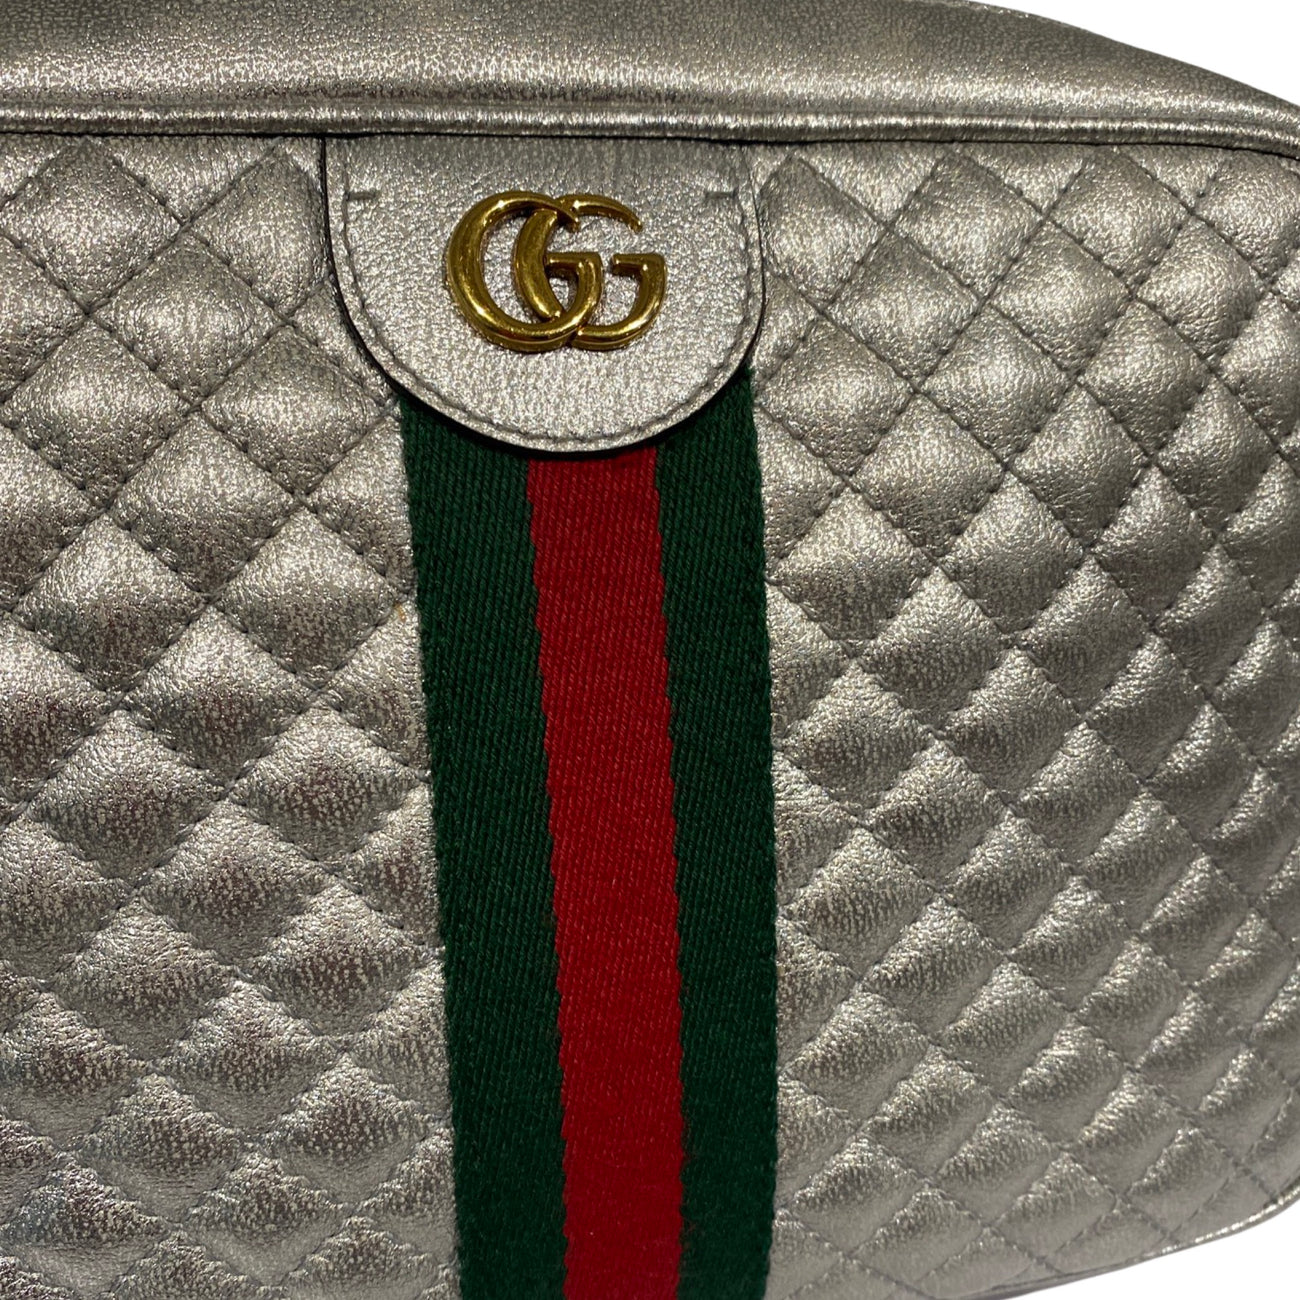 Gucci GG Small Quilted Leather Shoulder Bag Metallic Silver 541051